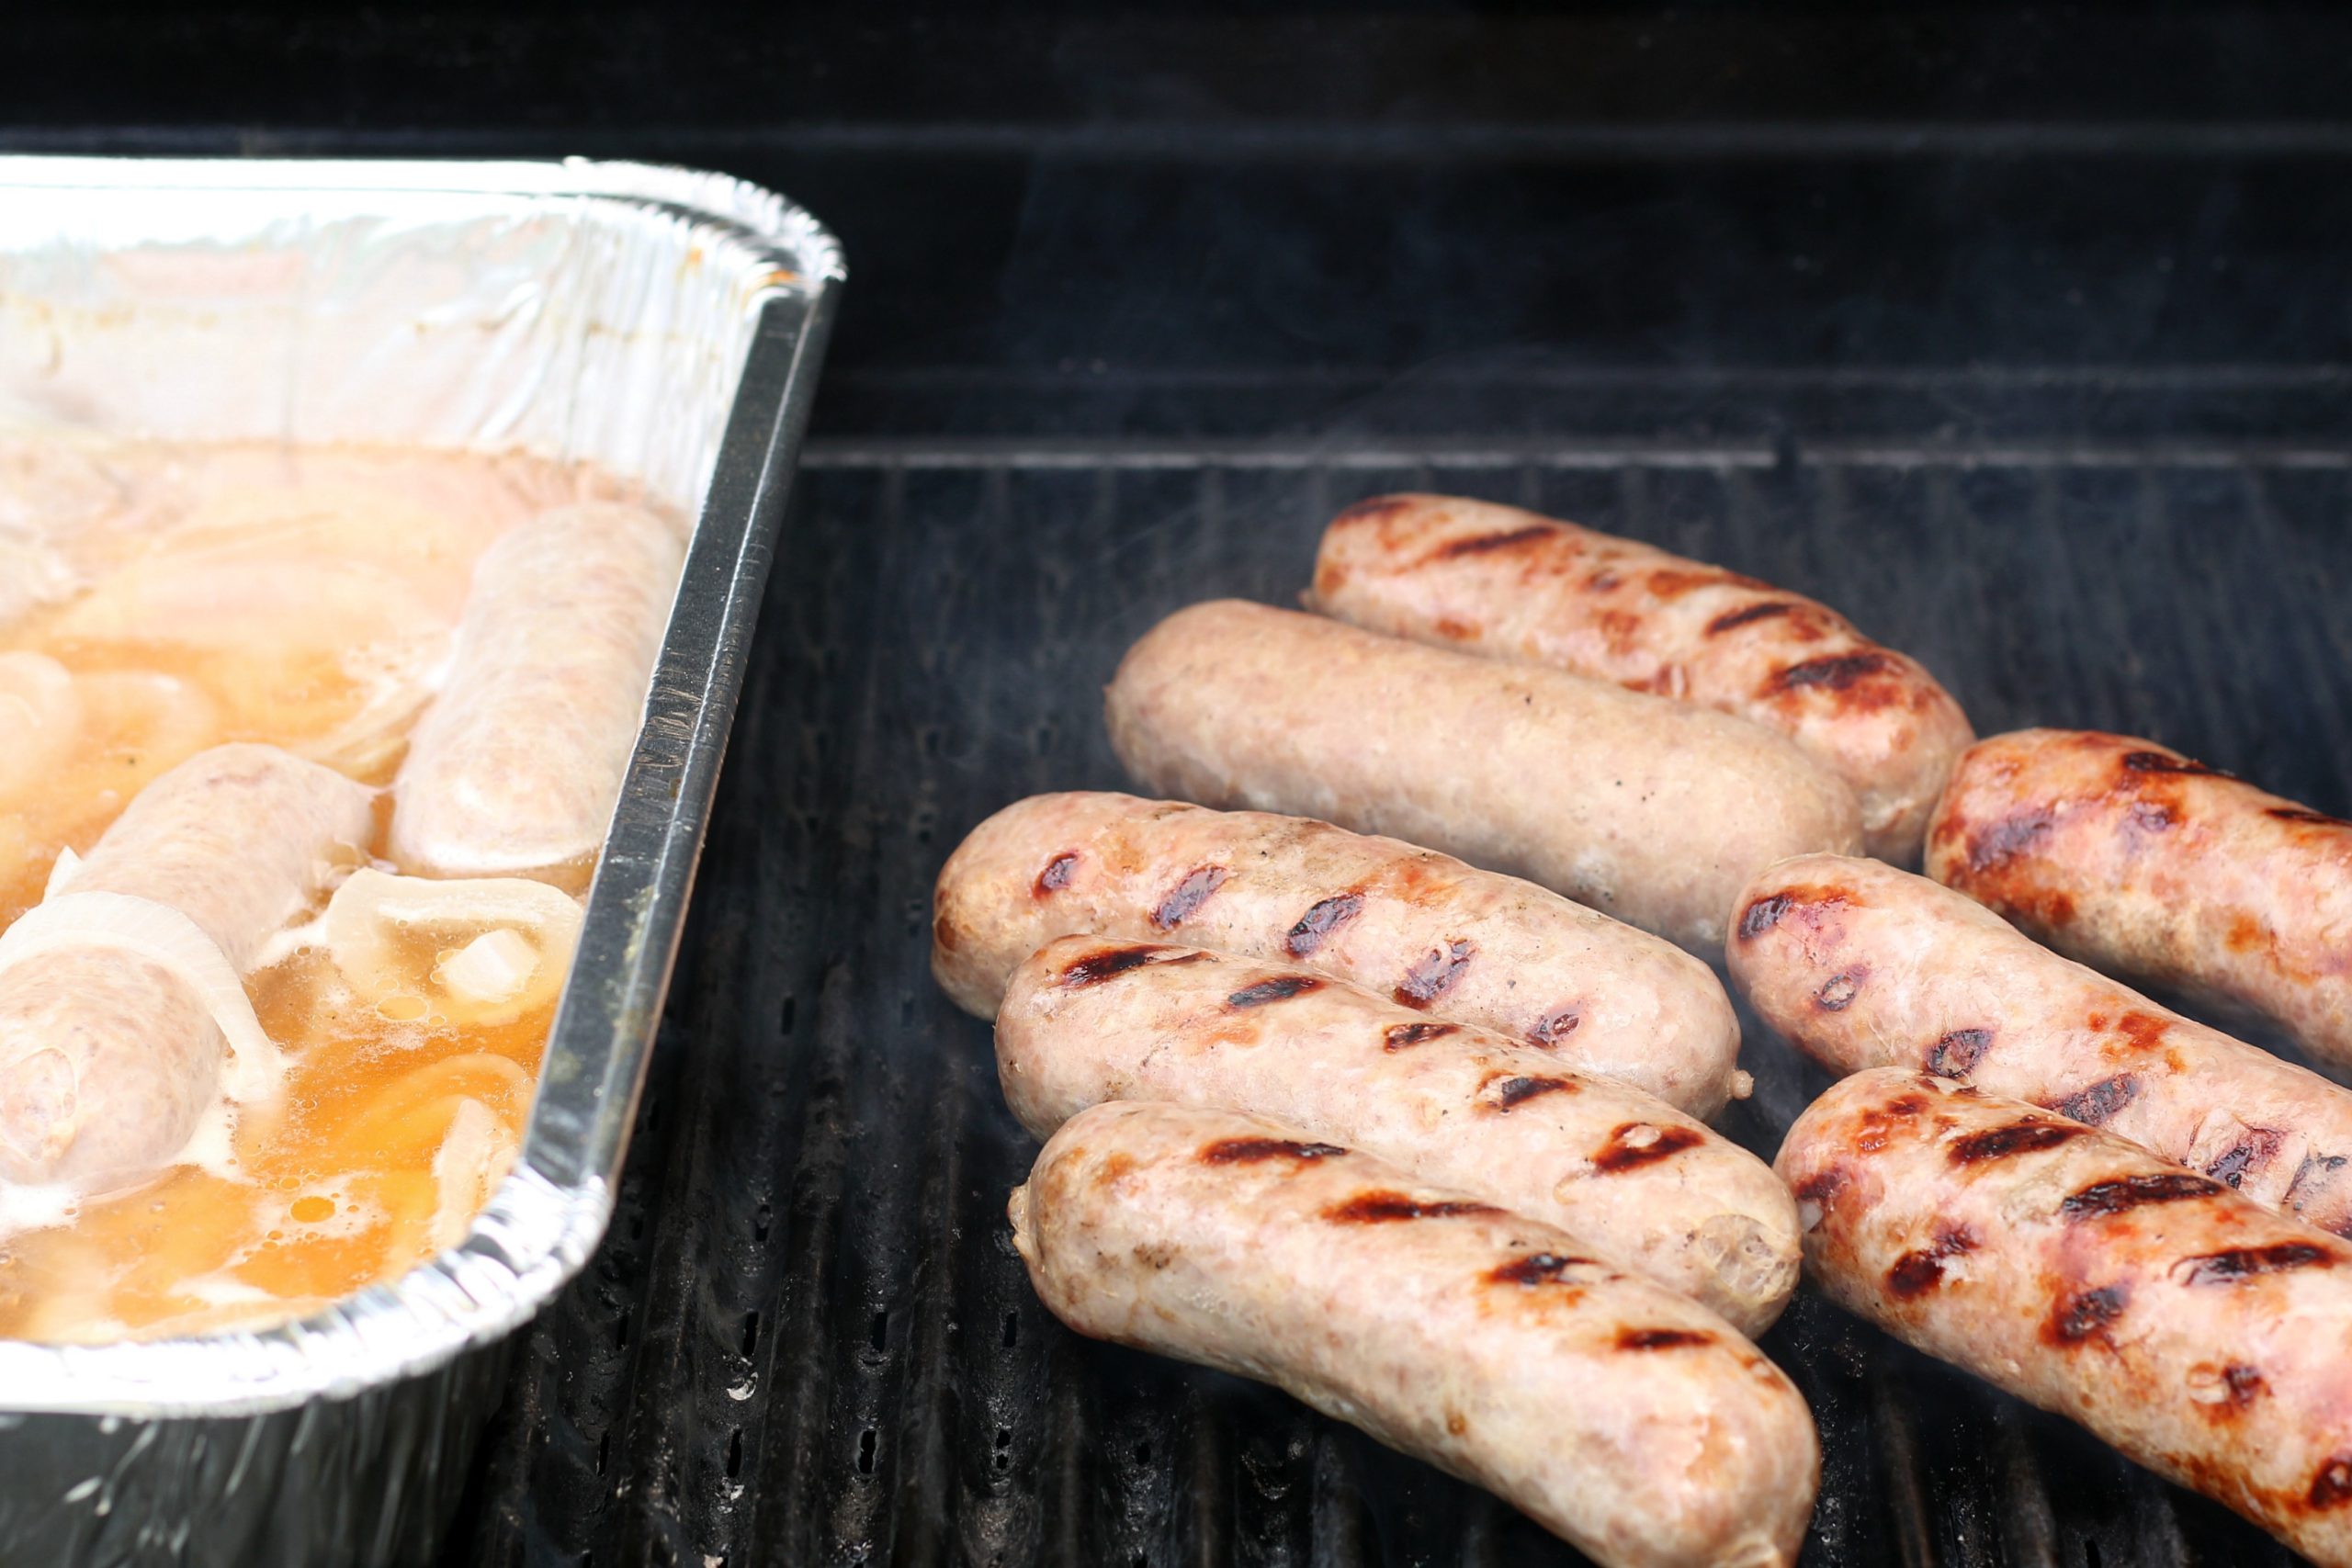 brats on a grill